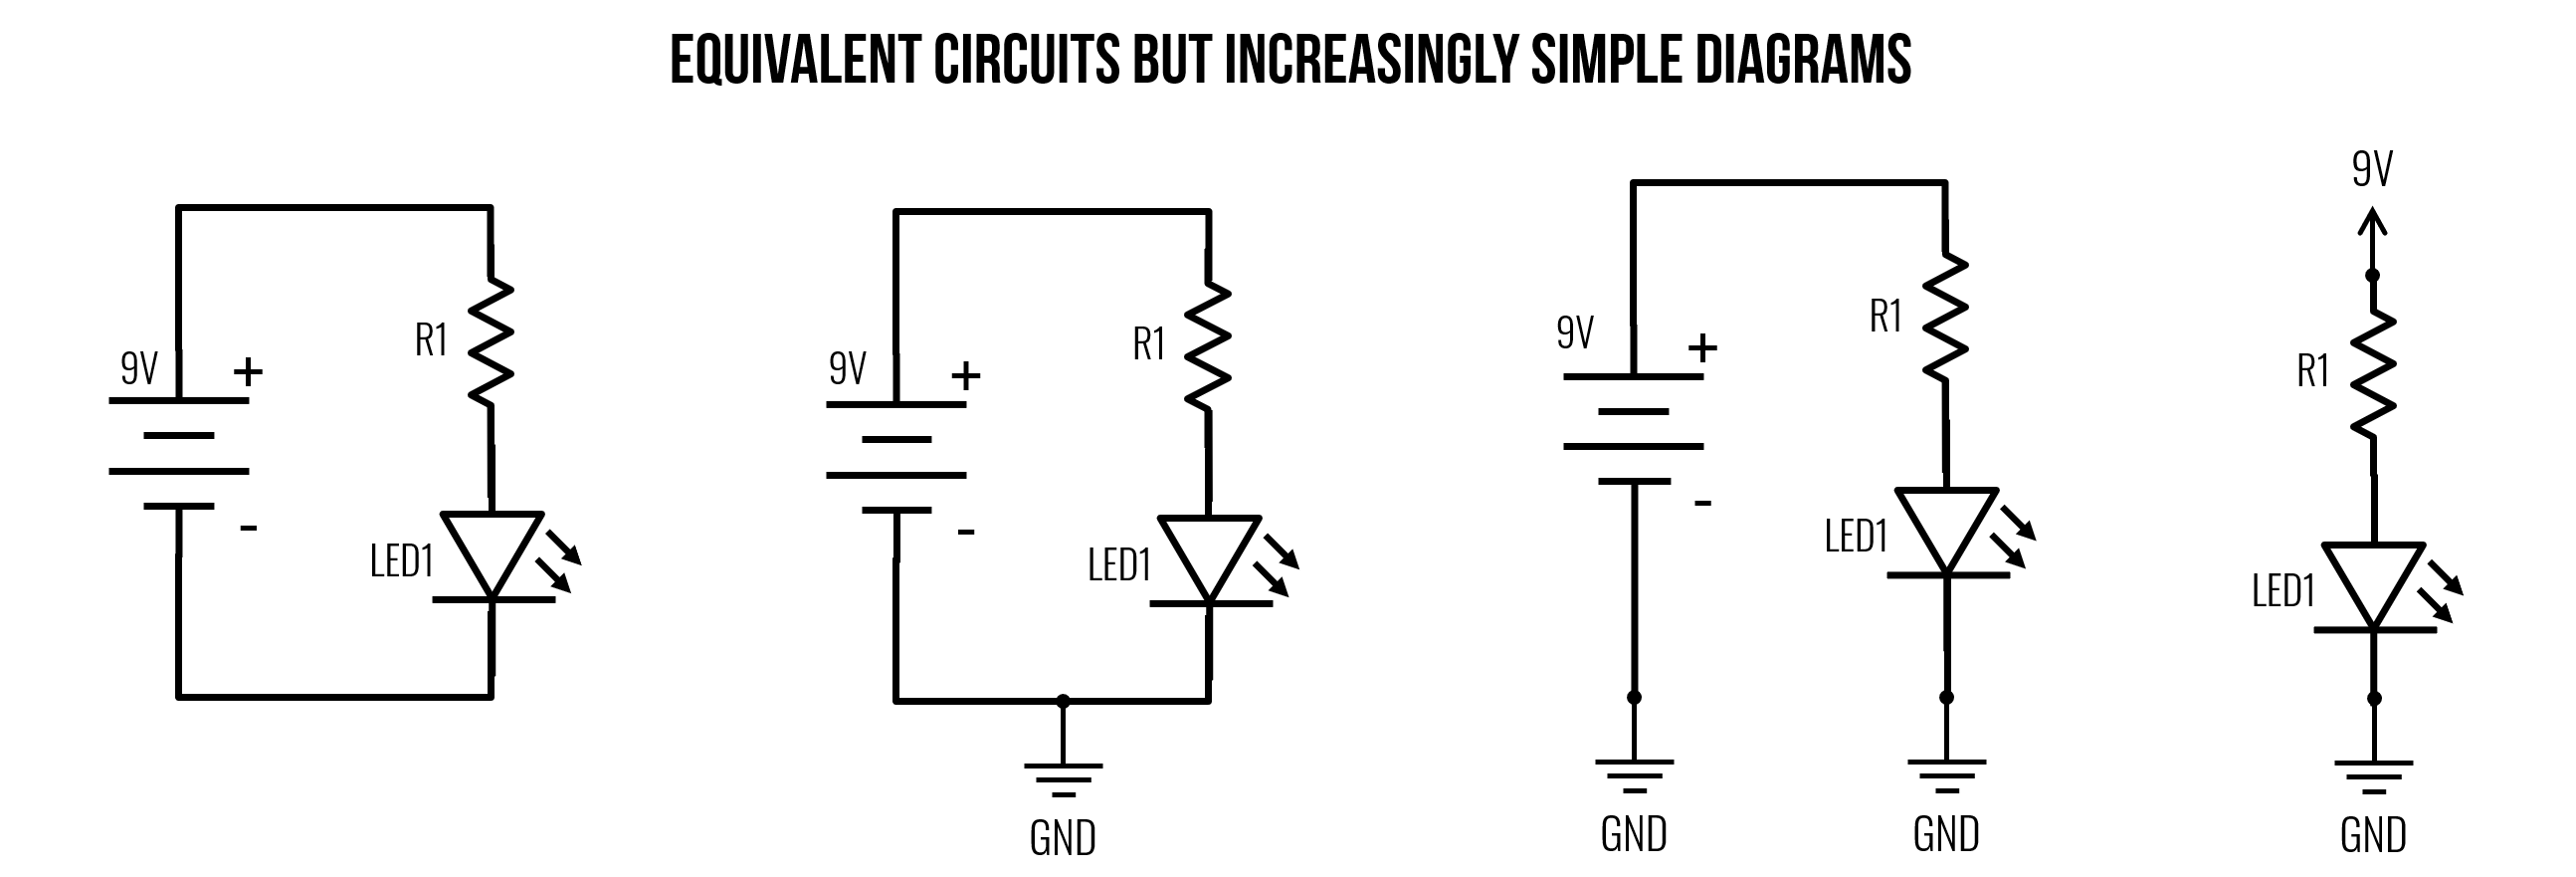 Shows four equivalent circuits but the two on the right use the special voltage and/or ground node symbols